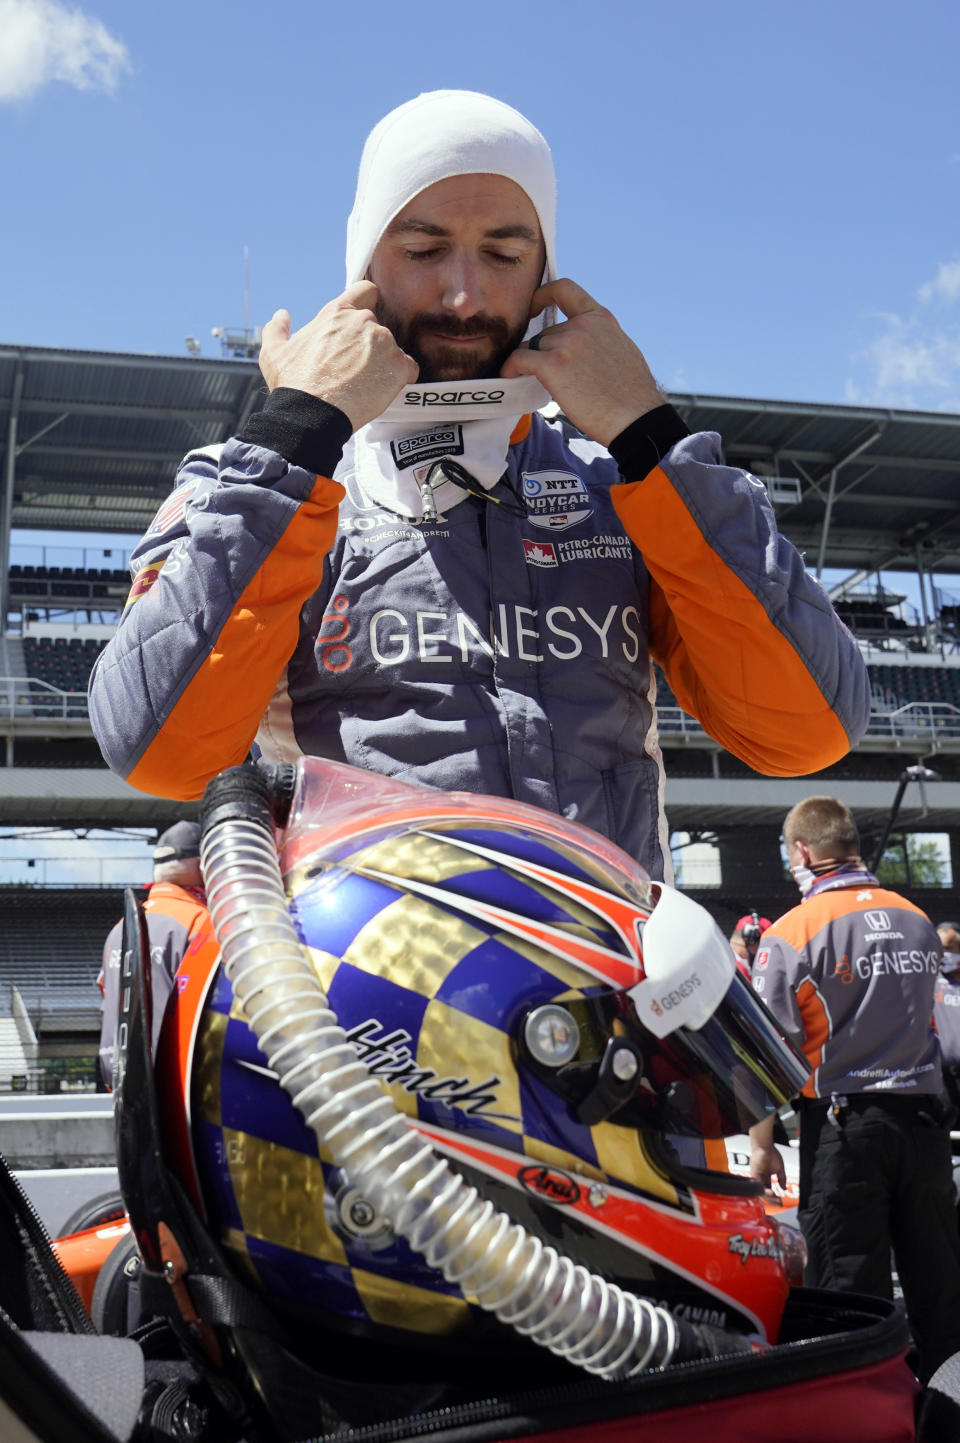 FILE- In this Aug. 16, 2020, file photo, James Hinchcliffe, of Canada, takes off his balaclava after qualifying for the Indianapolis 500 auto race at the Indianapolis Motor Speedway in Indianapolis. Hinchcliffe will return to Andretti Autosport for the final three races of the season to fill the seat left vacant when Zach Veach stepped out of the car earlier this week, Andretti Autosport announced Friday, Sept. 25, 2020. (AP Photo/Darron Cummings, File)